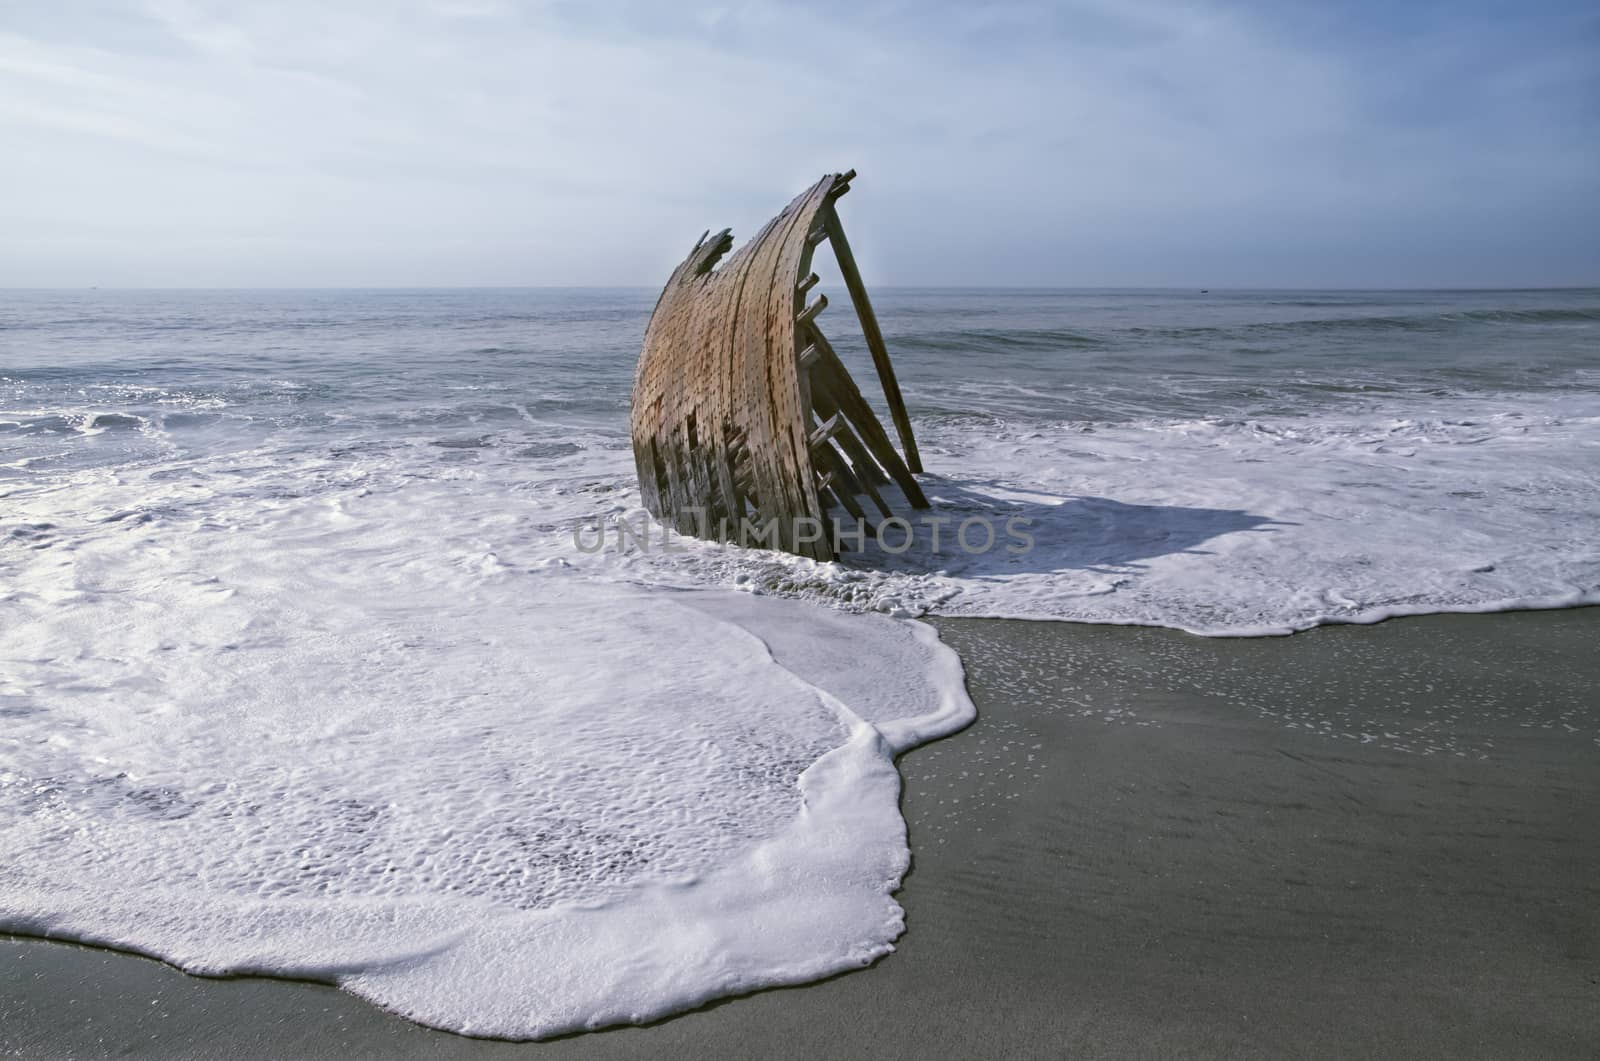 Wrecked Dhow on a beach by Tjeerdkruse